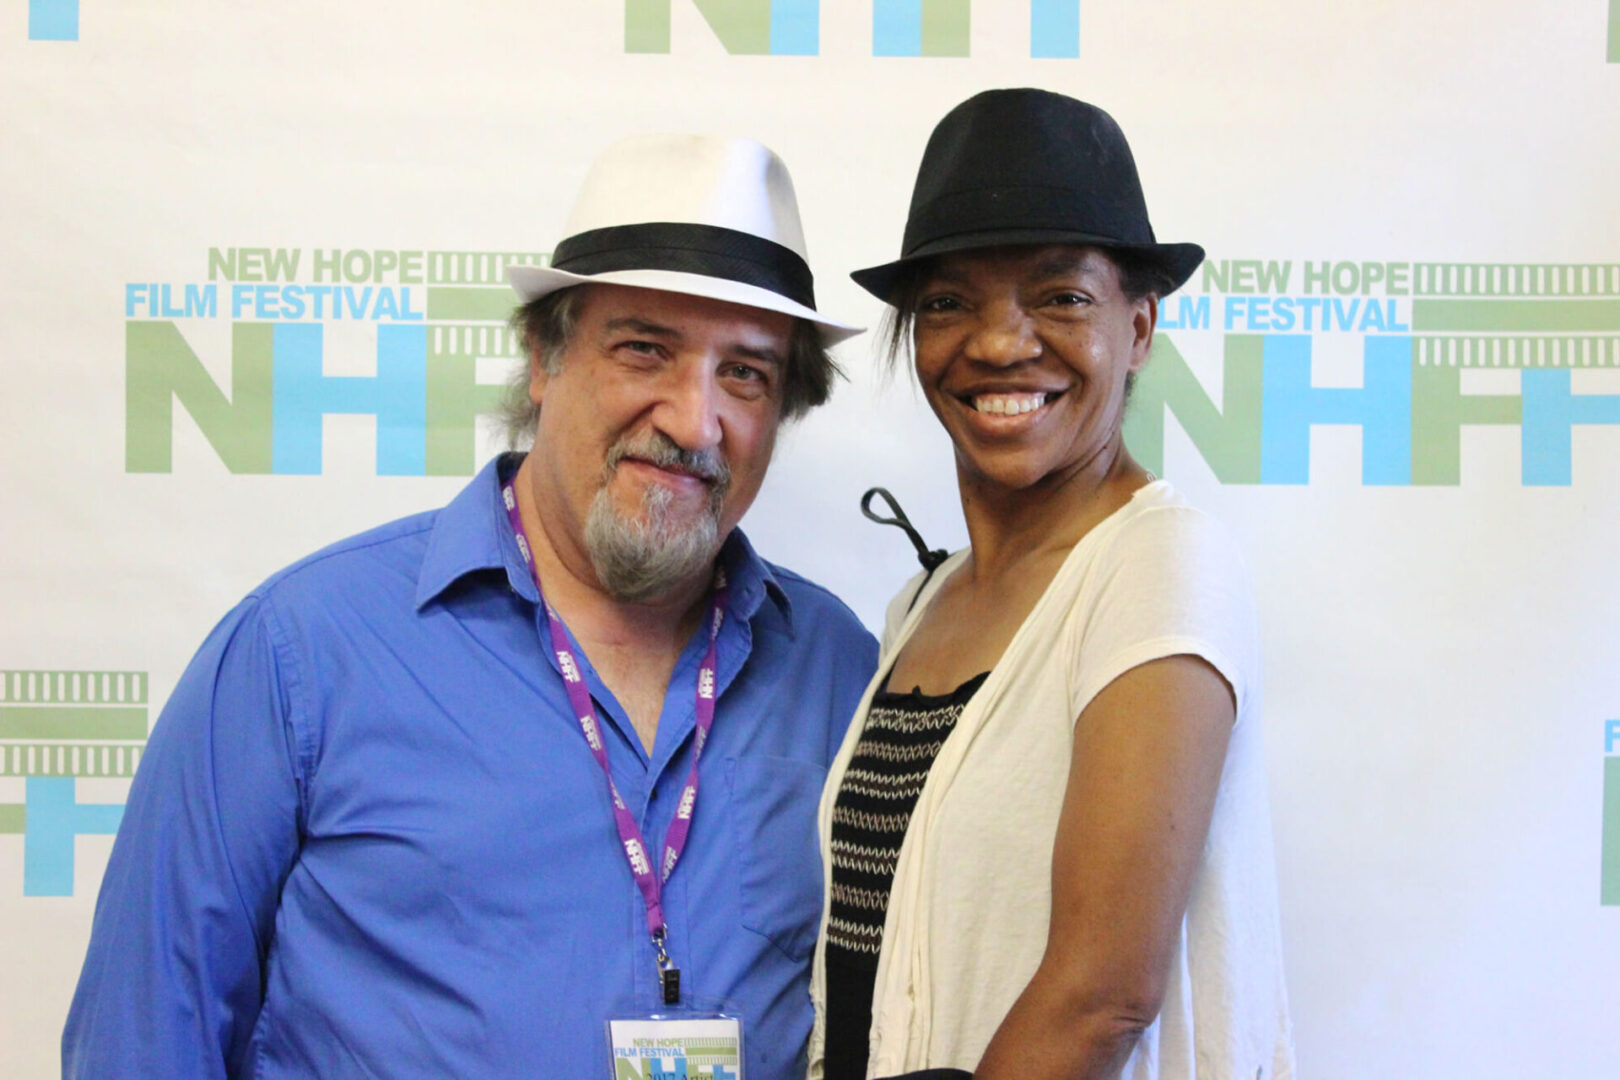 Two film festival attendees wearing formal hats